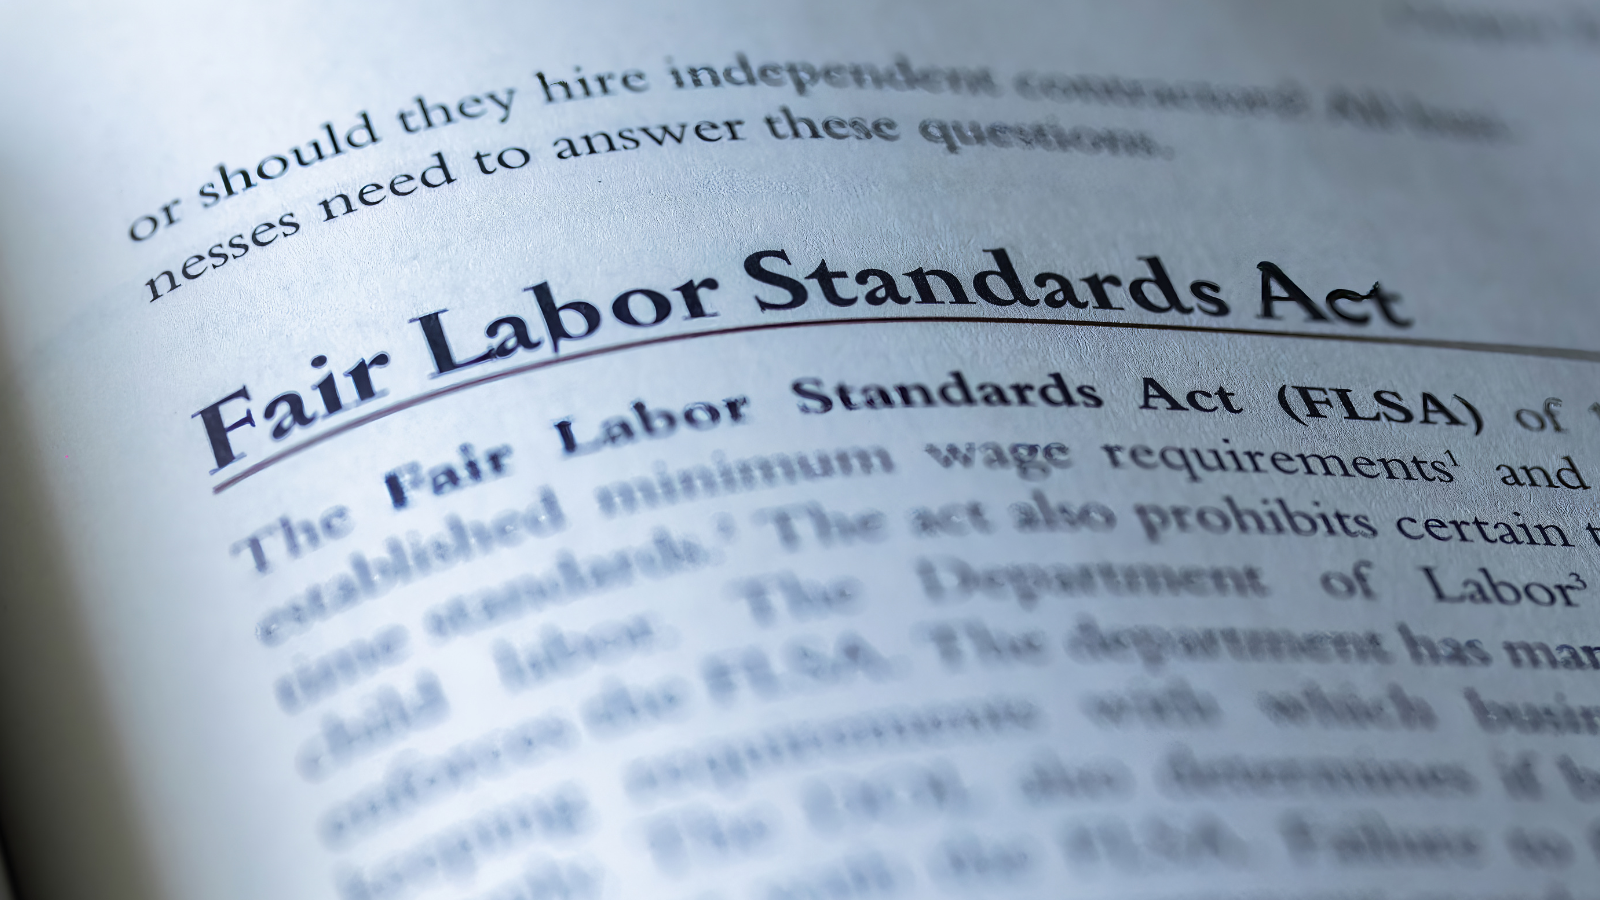 Fair Labor Standards Act and HR